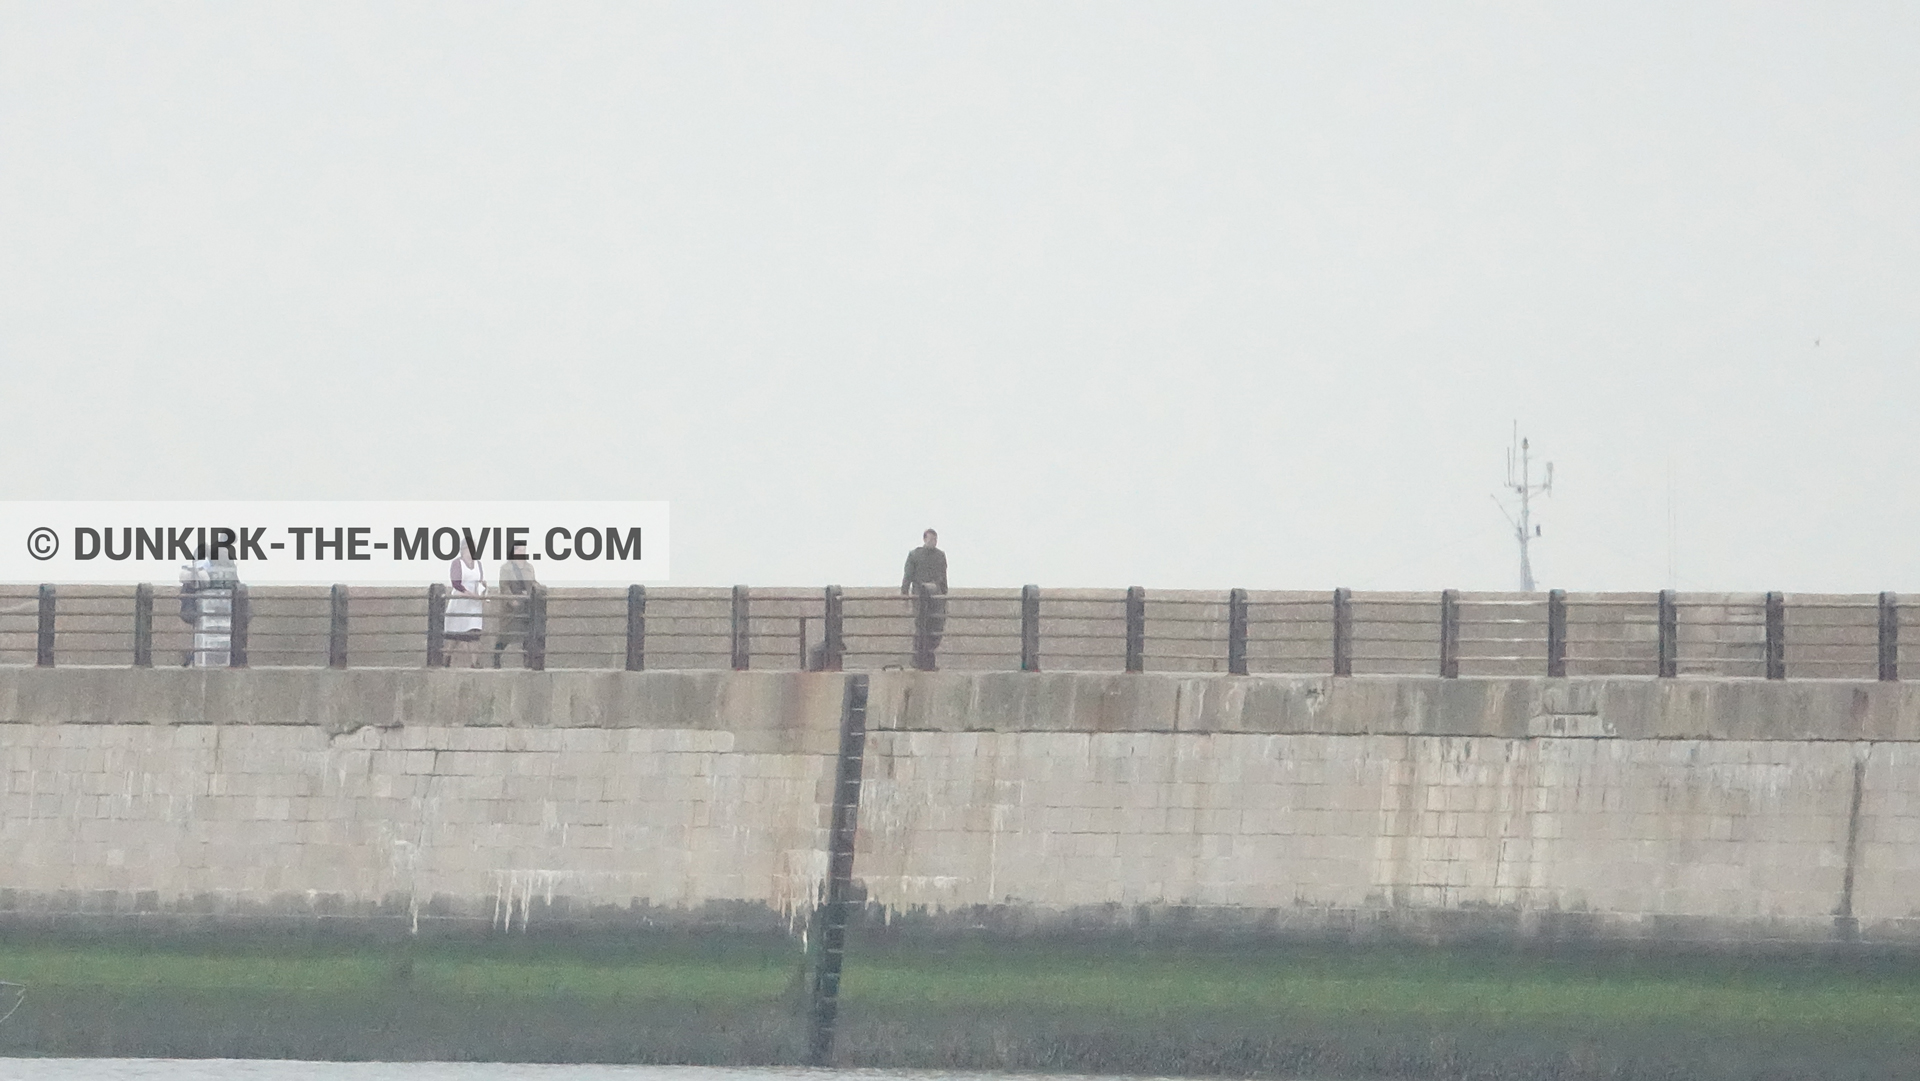 Picture with grey sky, supernumeraries, EST pier, technical team,  from behind the scene of the Dunkirk movie by Nolan